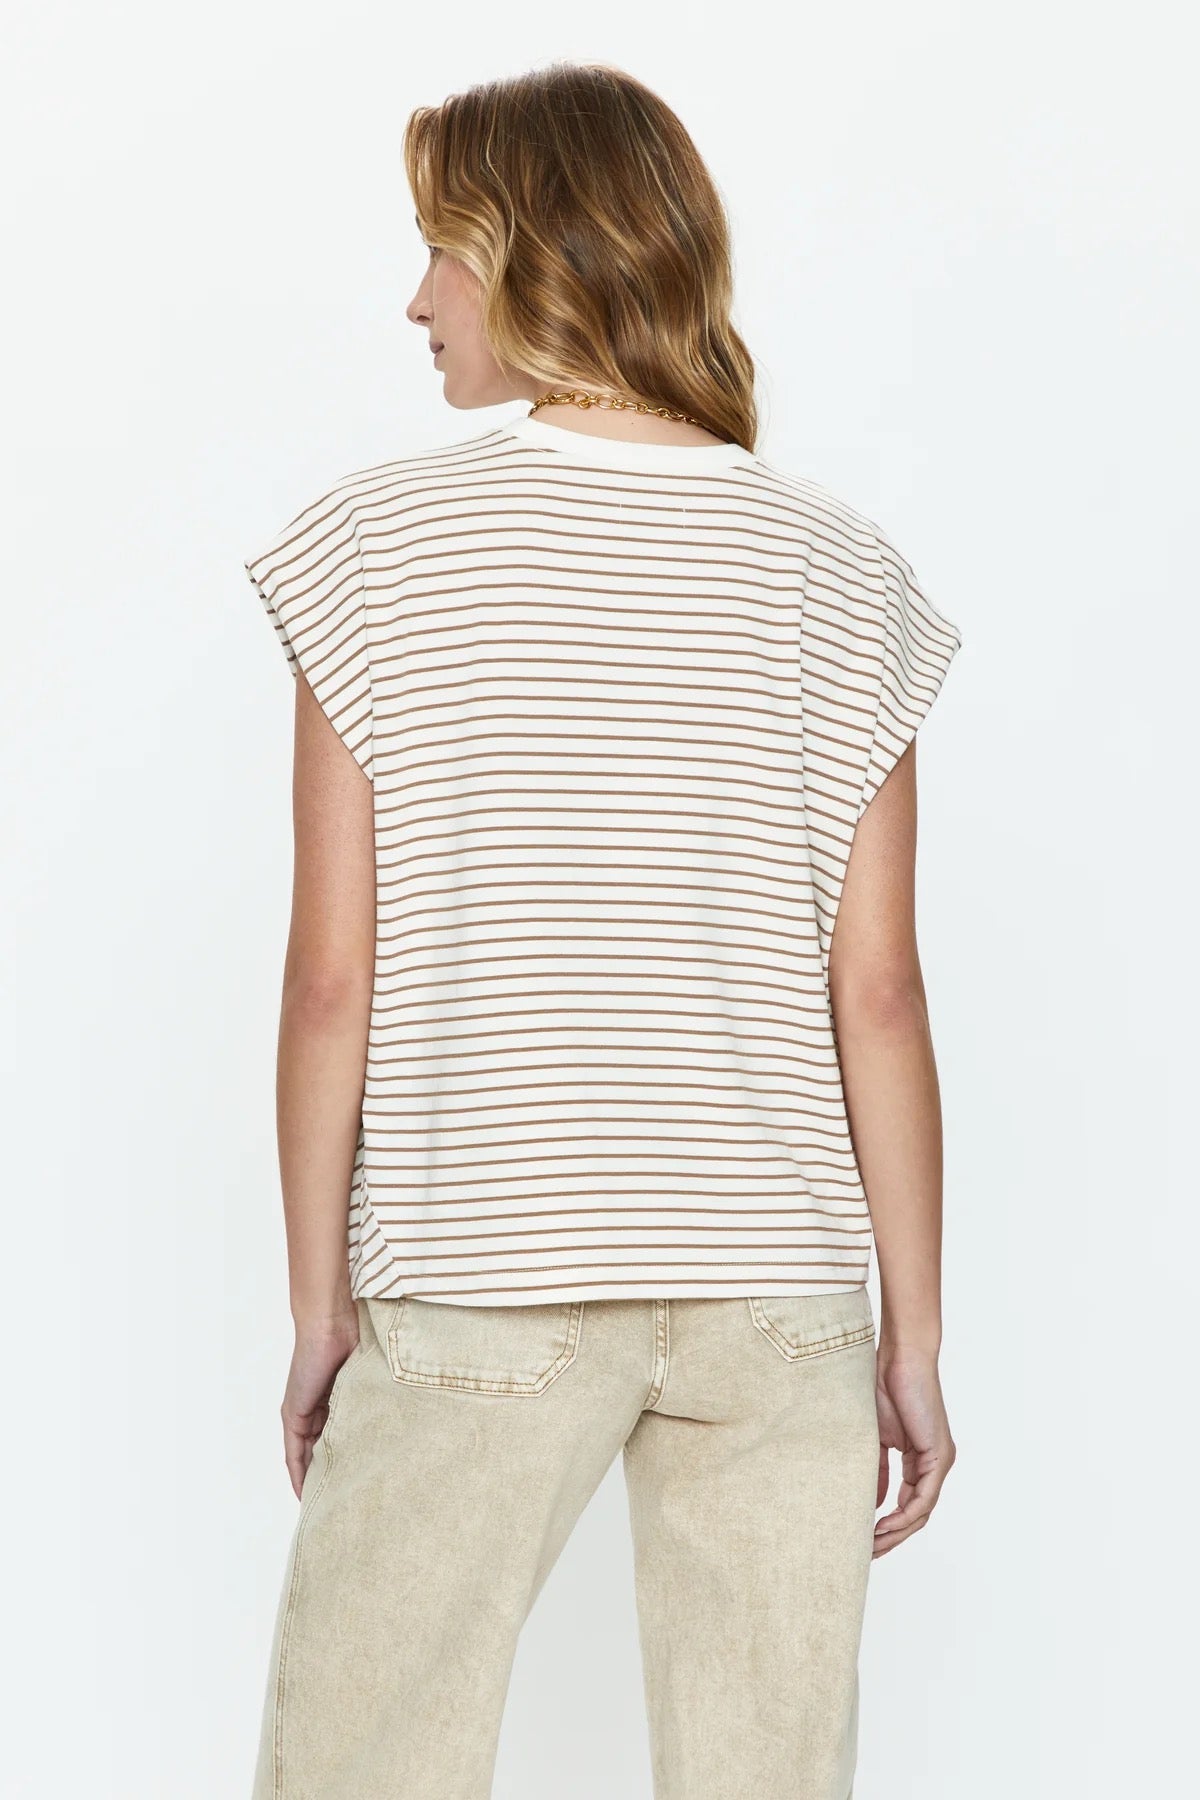 Trina Muscle Tee in Sable Stripe by PISTOLA